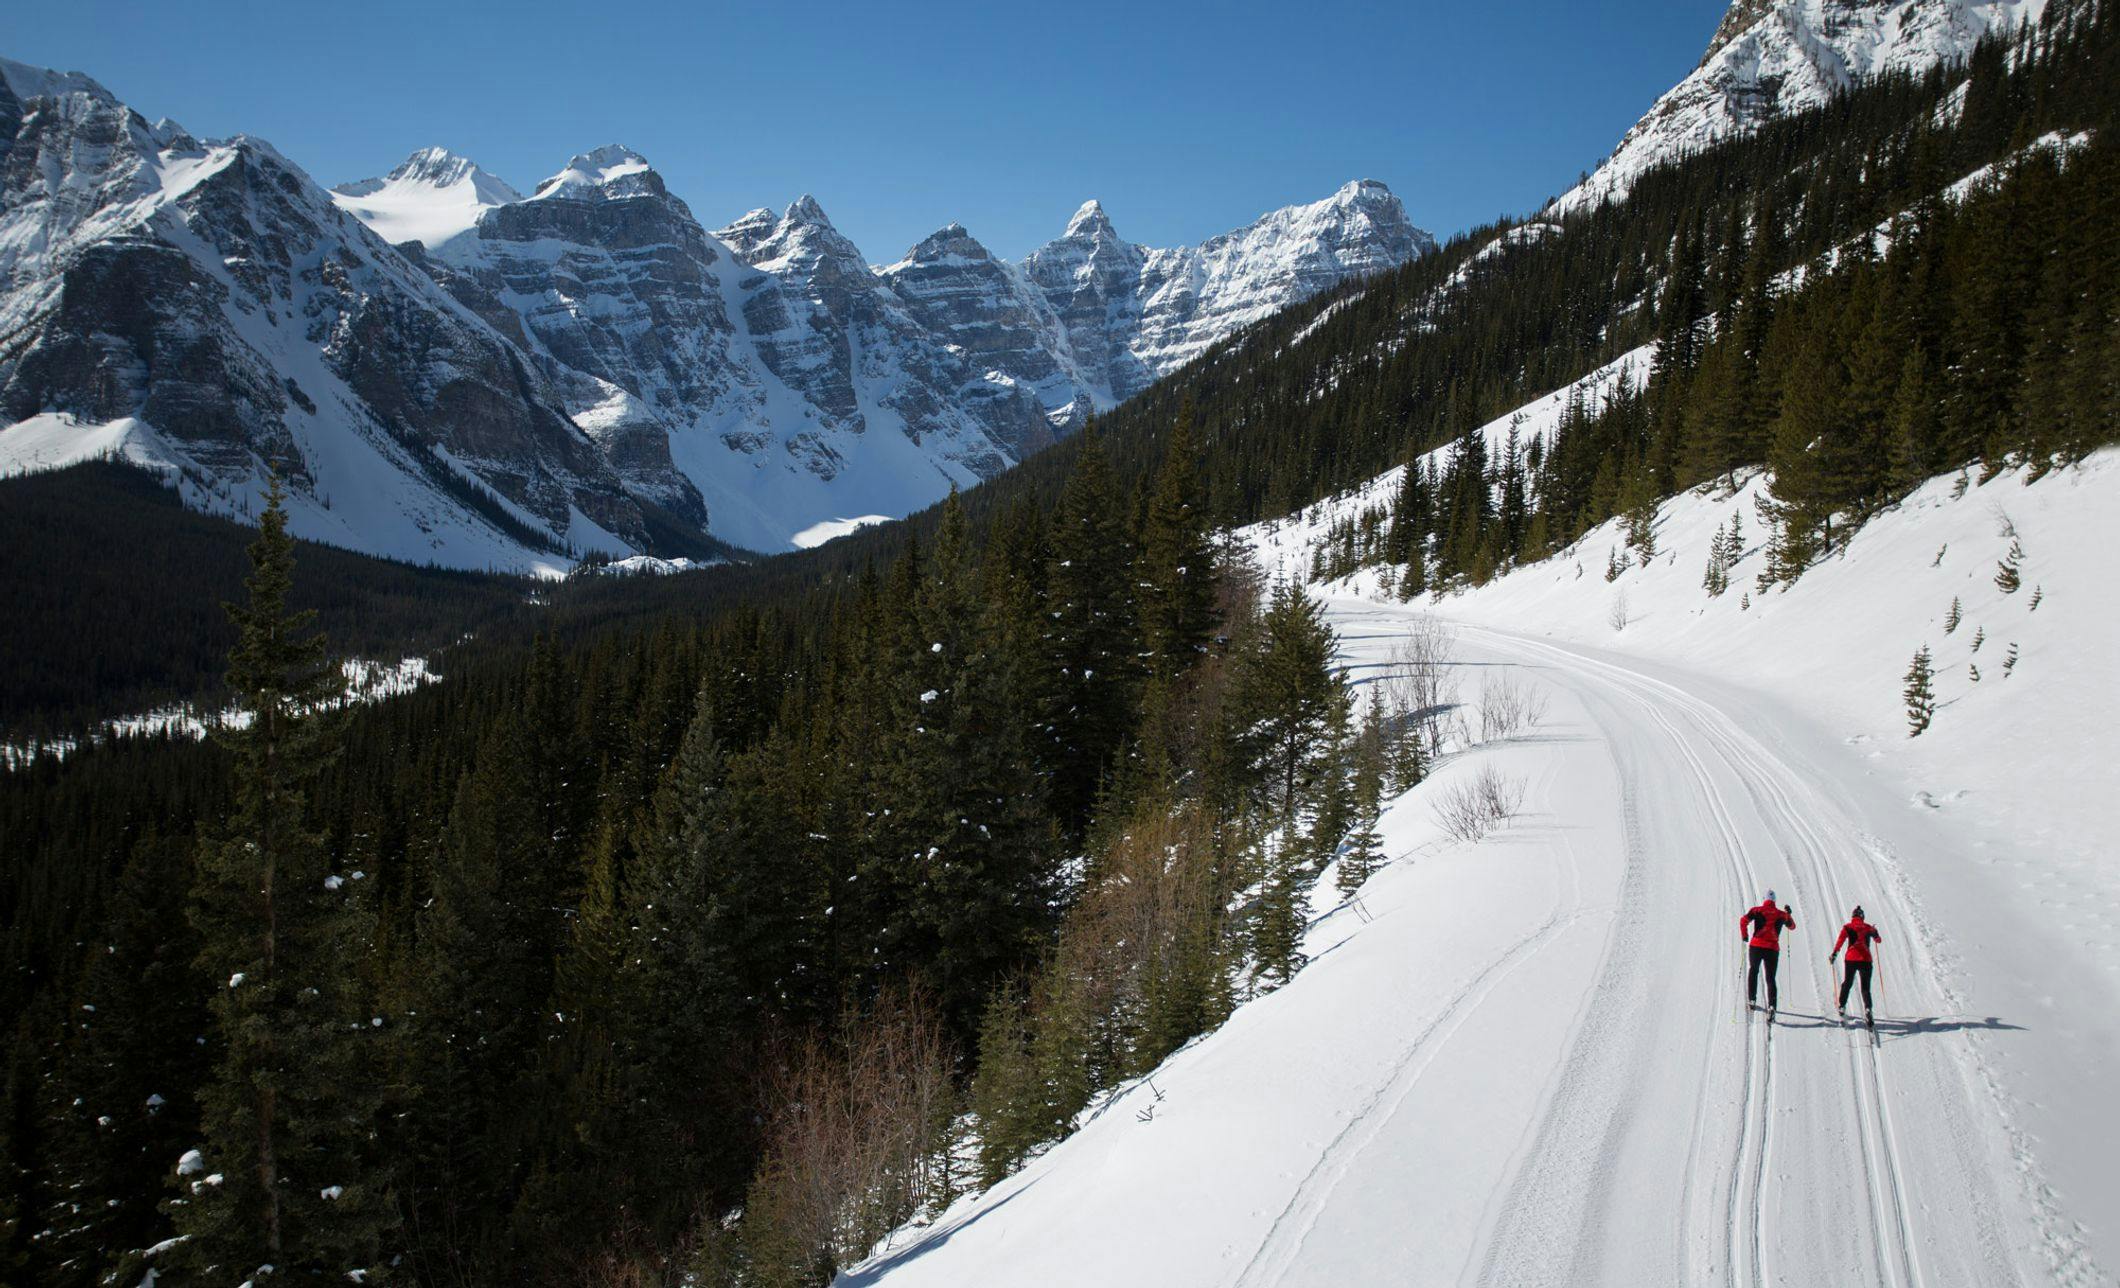 Cross country skiing in Banff National Park is a fantastic way to experience the beauty of winter in the Canadian Rocky Mountains